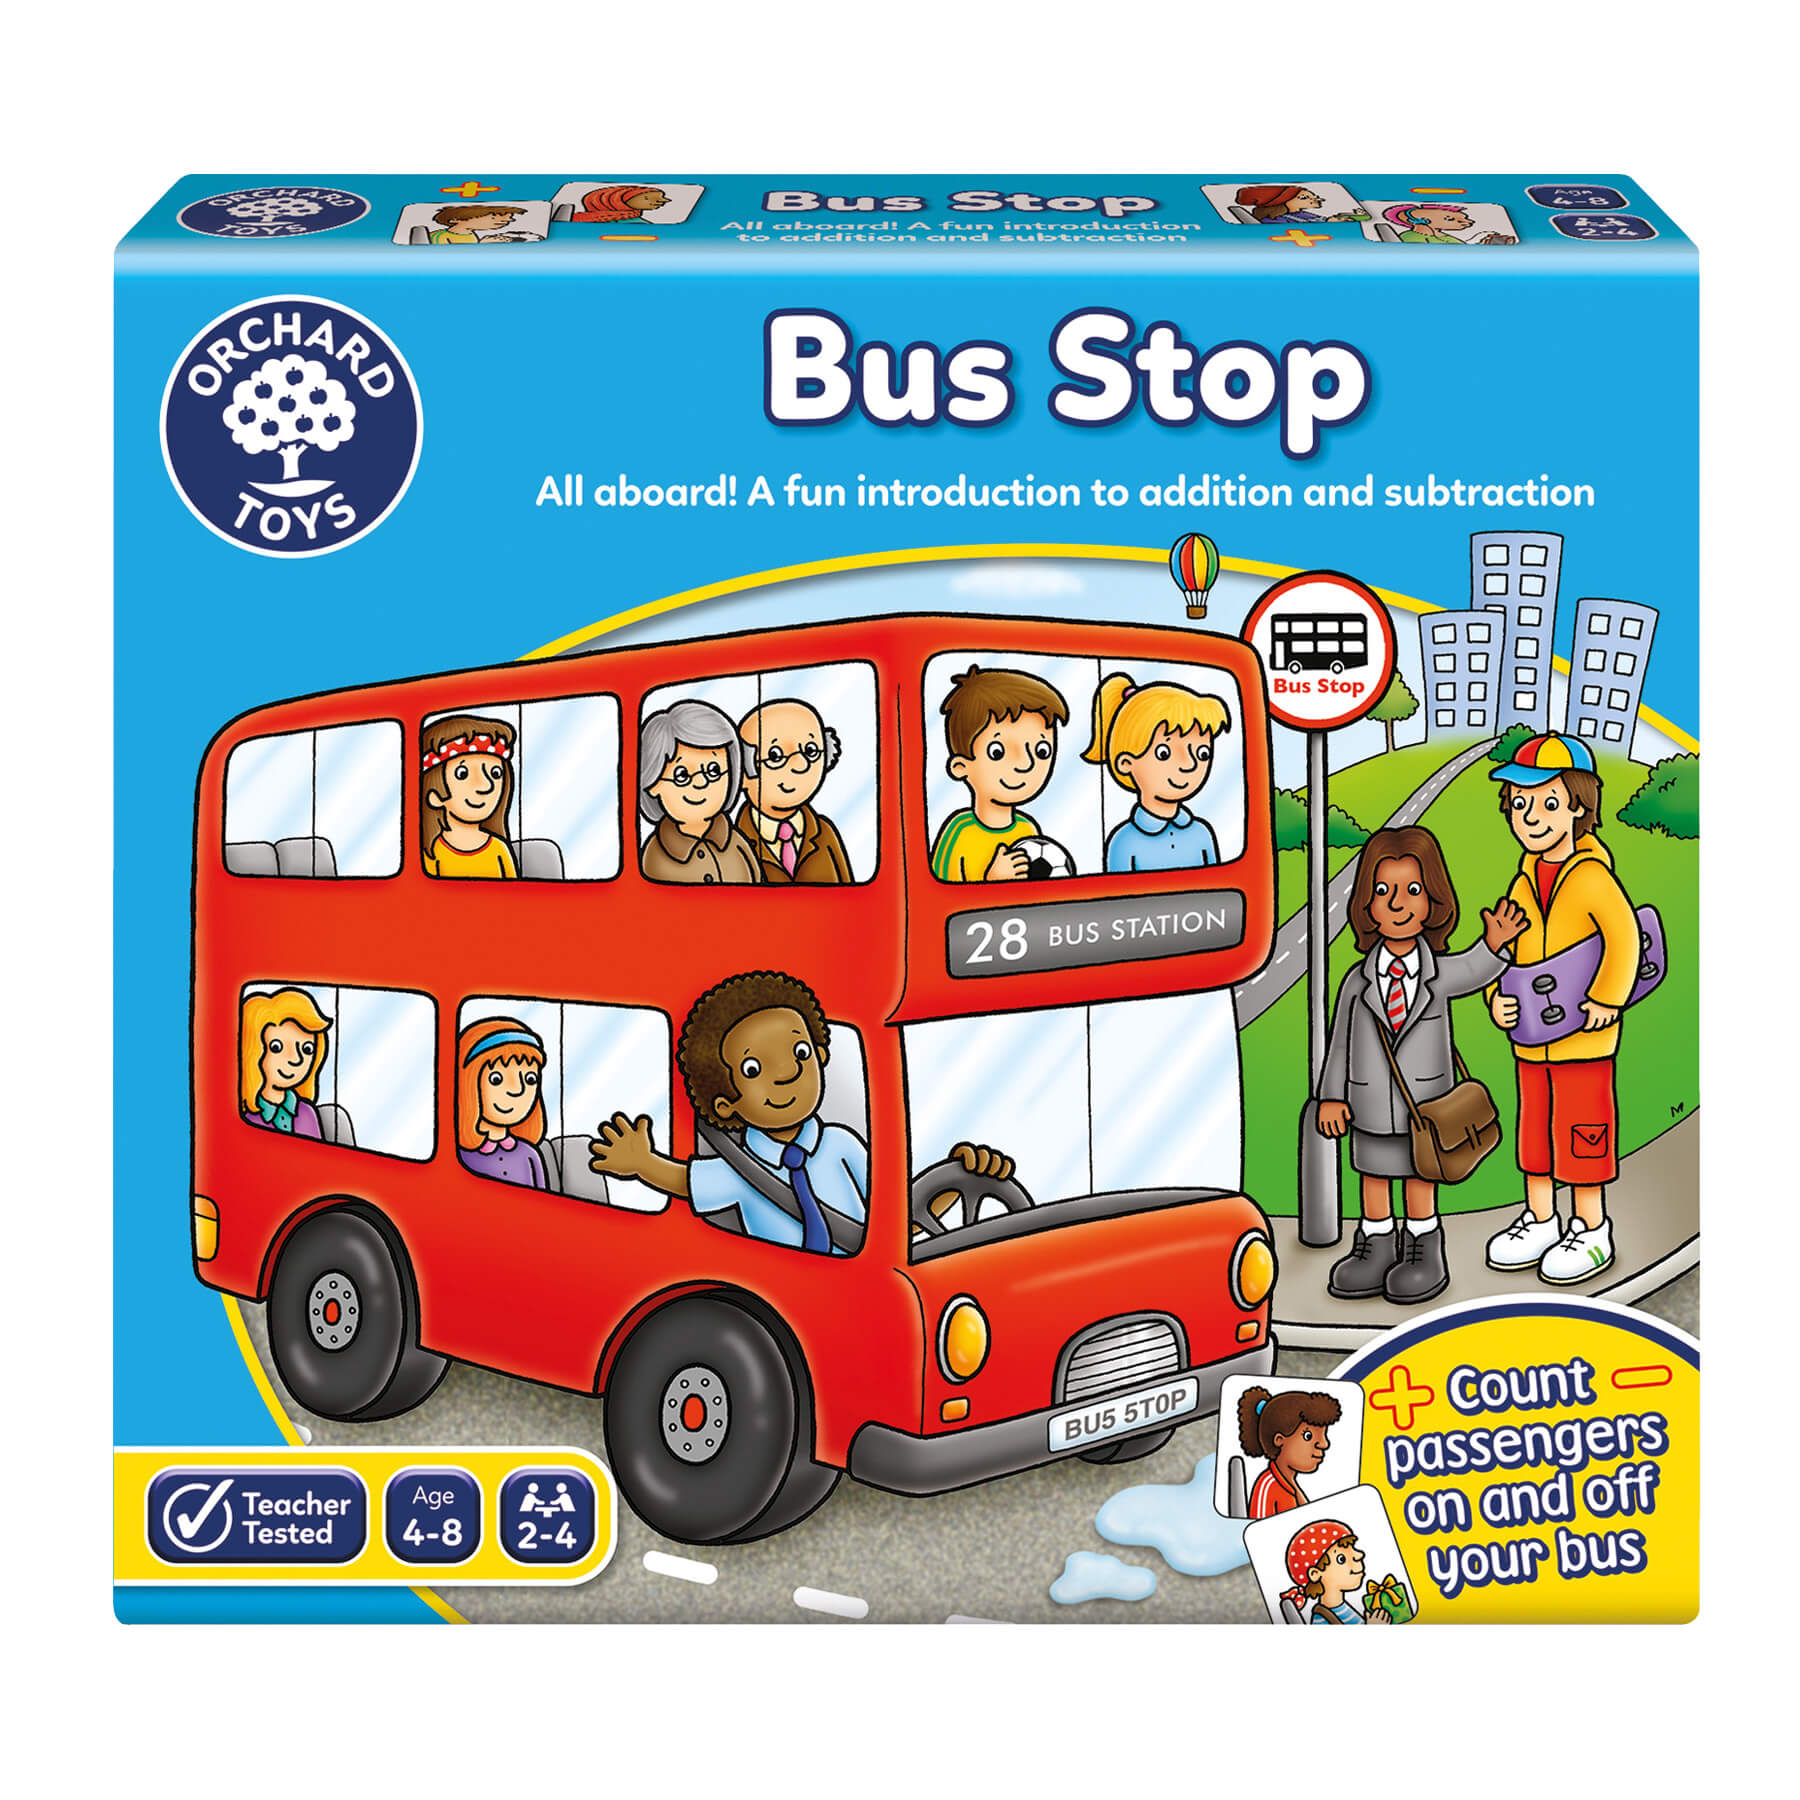 product view - orchard bus stop game - orchard toys bus stop